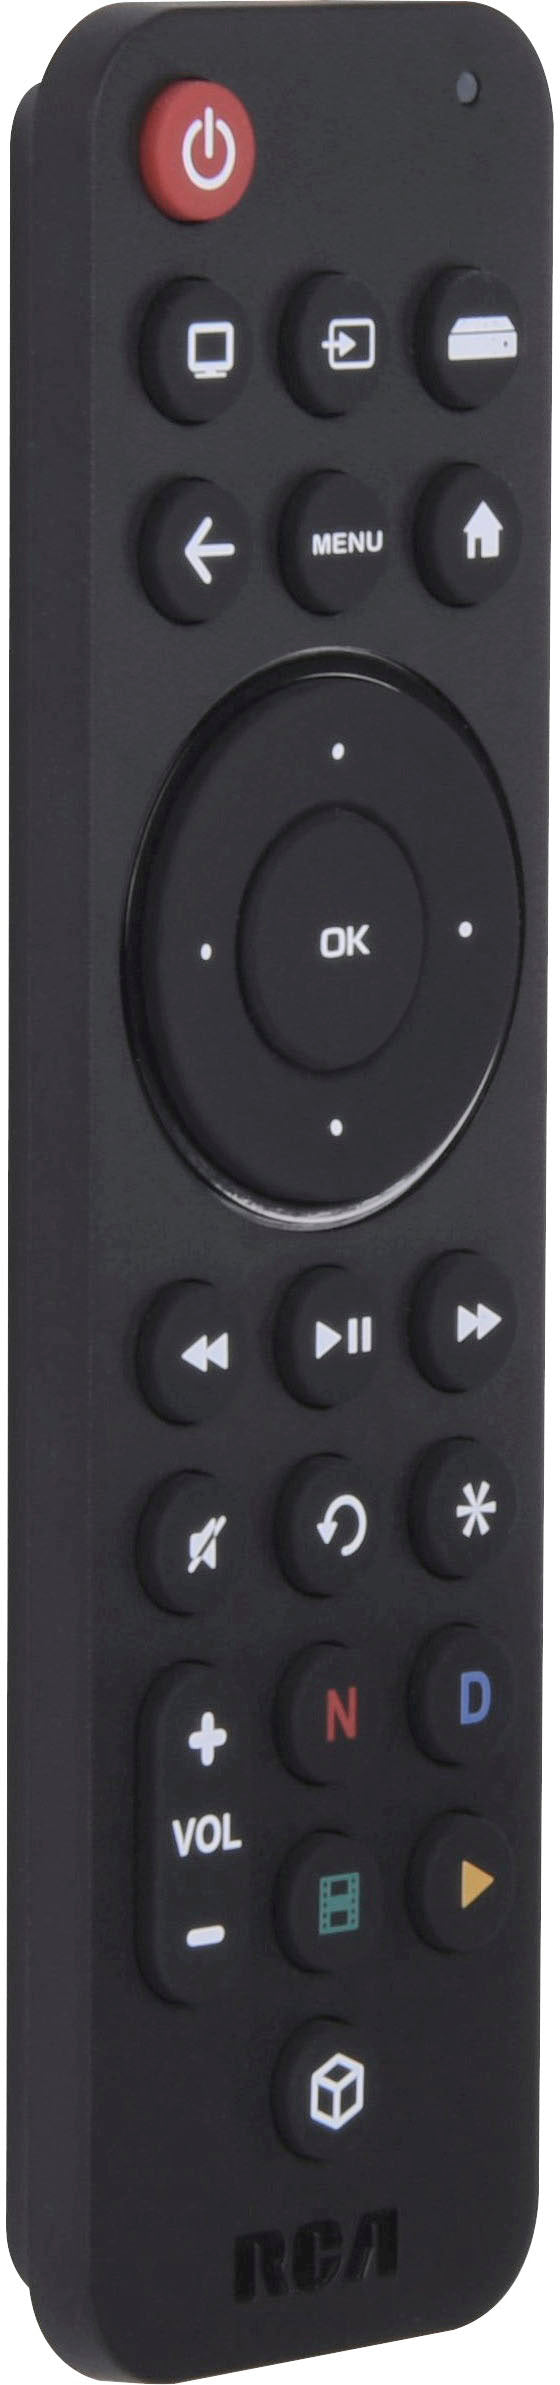 RCA - Rechargeable 3-Device Universal Remote - Black_1